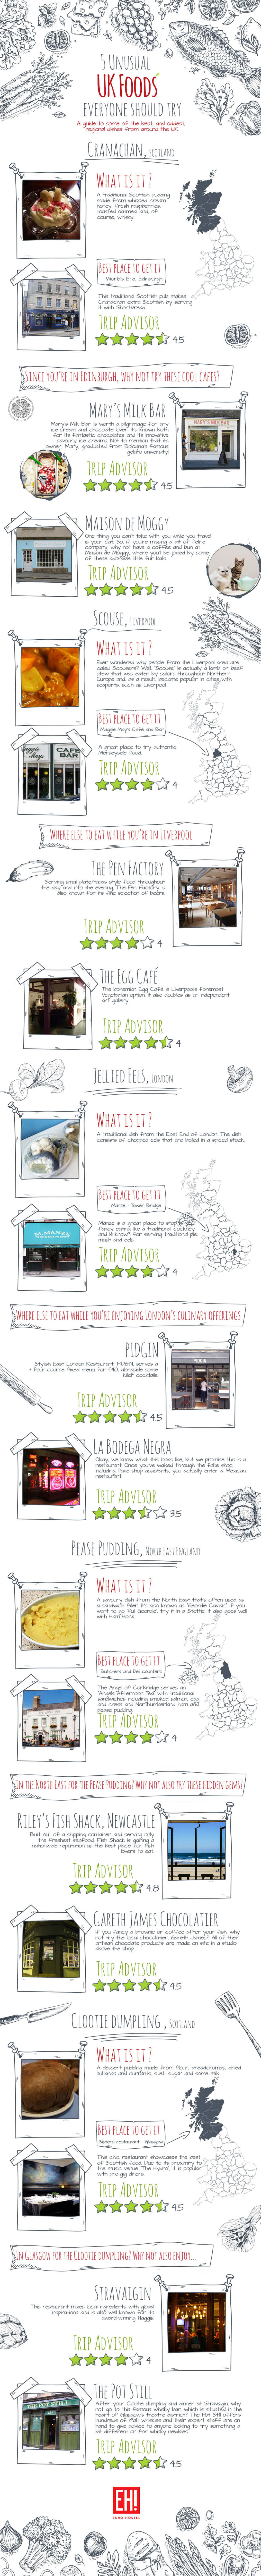 Weird British Food Foreigners Should Try Infographic